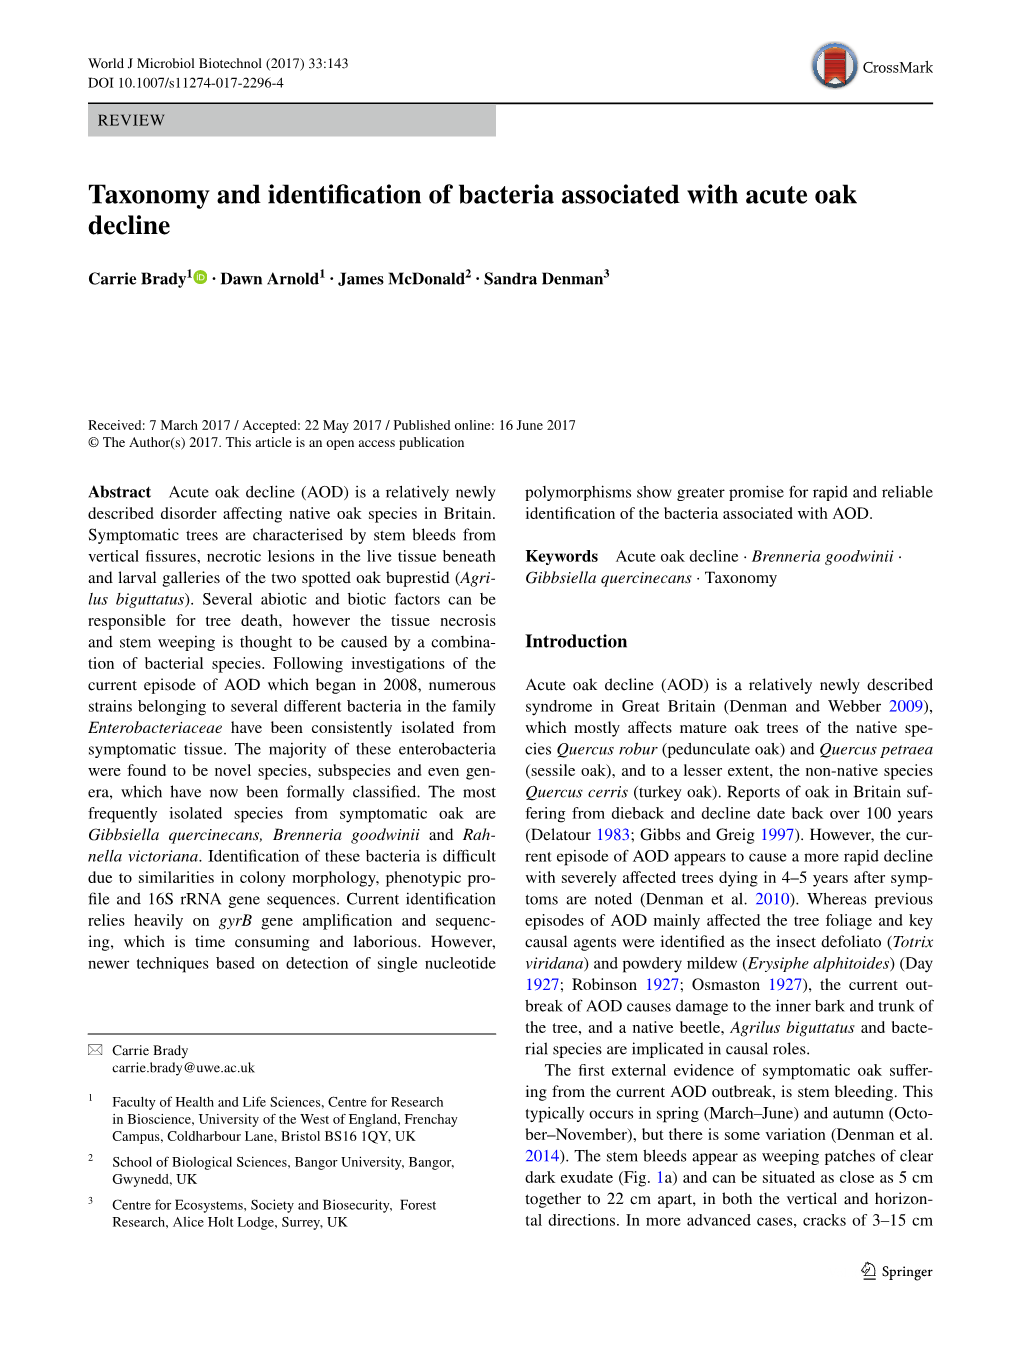 Taxonomy and Identification of Bacteria Associated with Acute Oak Decline